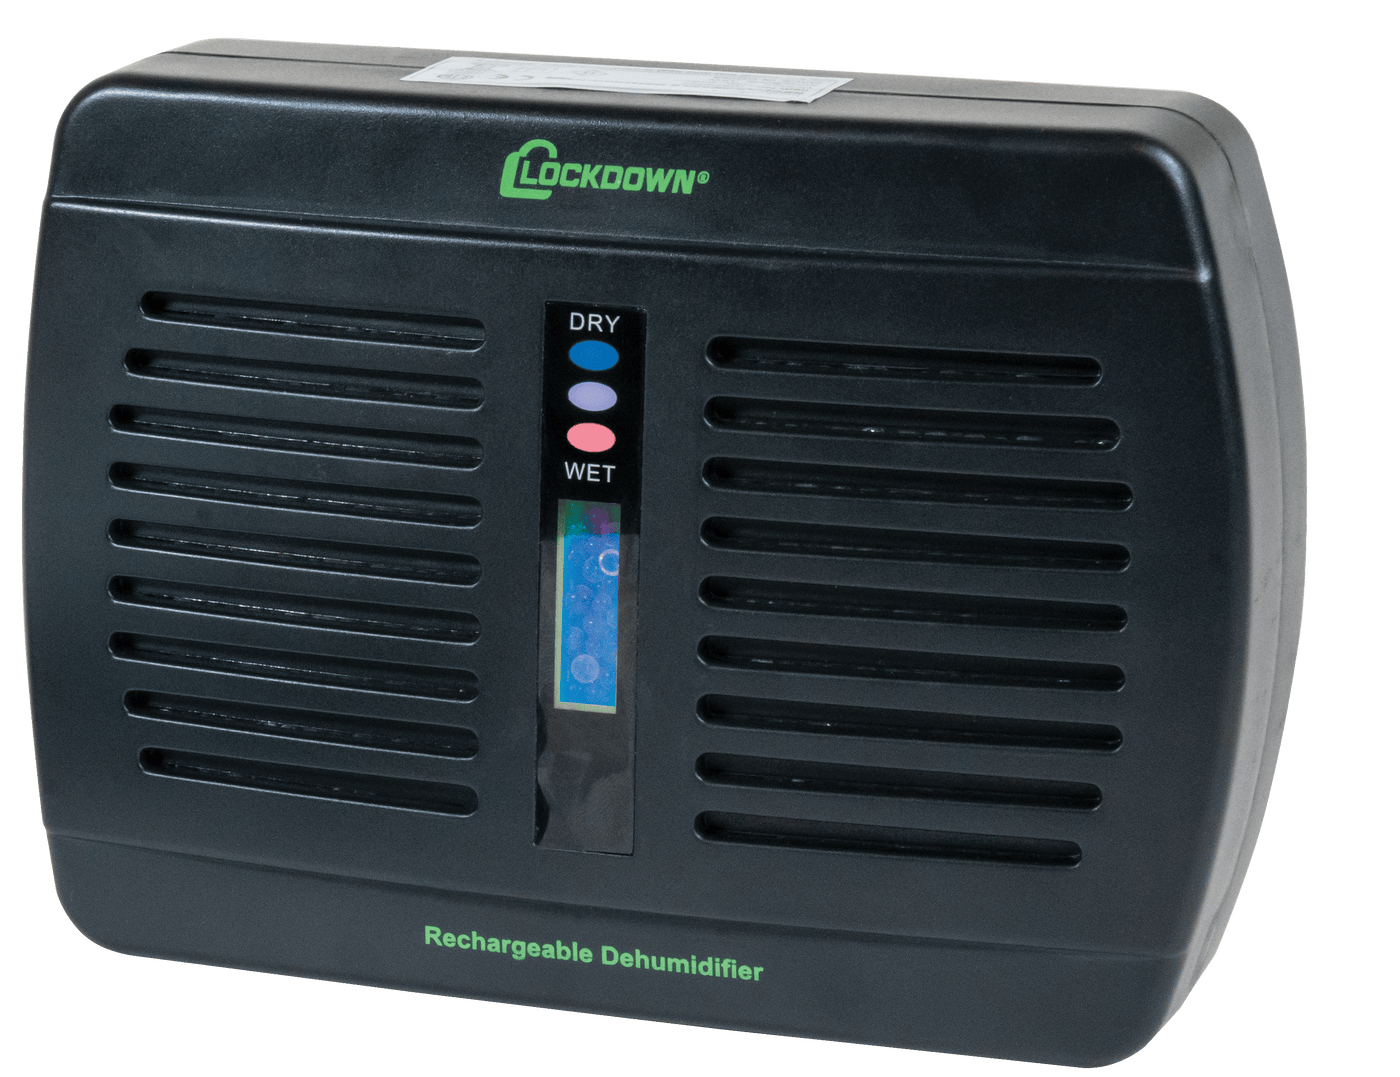 Lockdown Lockdown Rechargeable - Dehumidifier Safes And Accessories